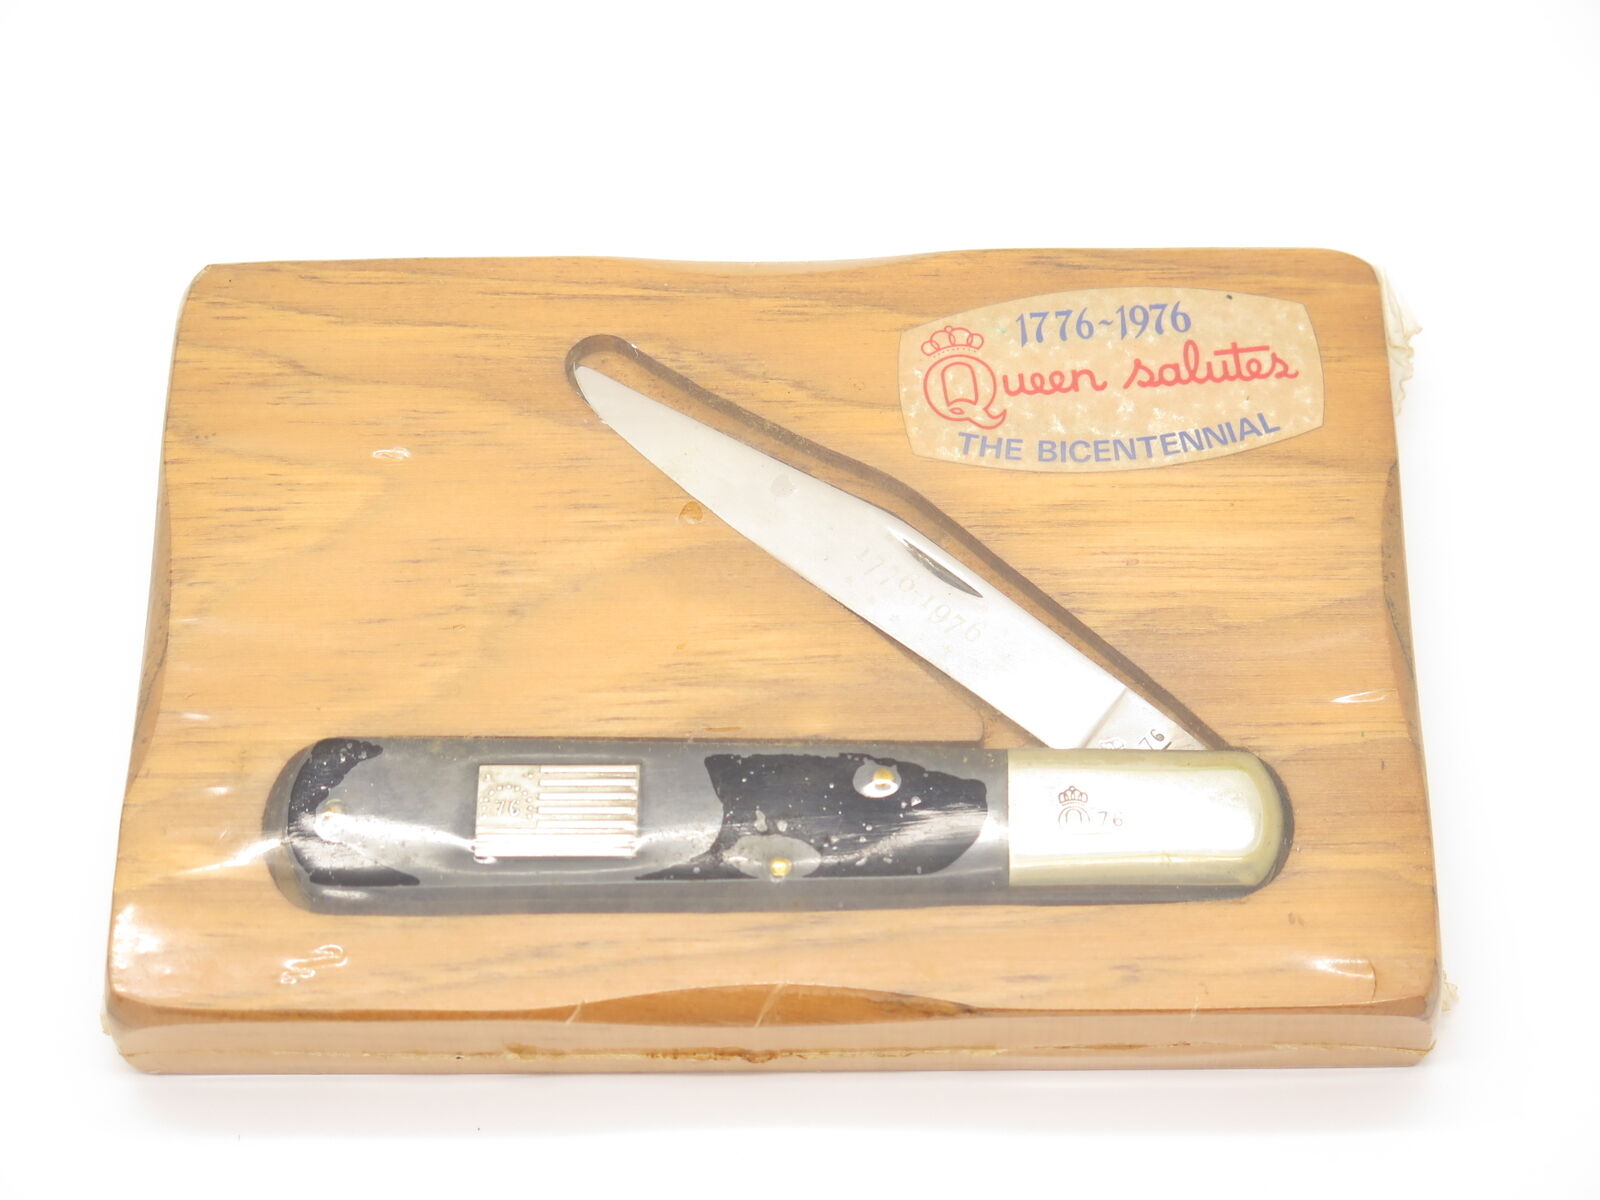 Vintage Queen Salutes USA Bicentennial 1776-1976 Pocket Knife in Wood Display